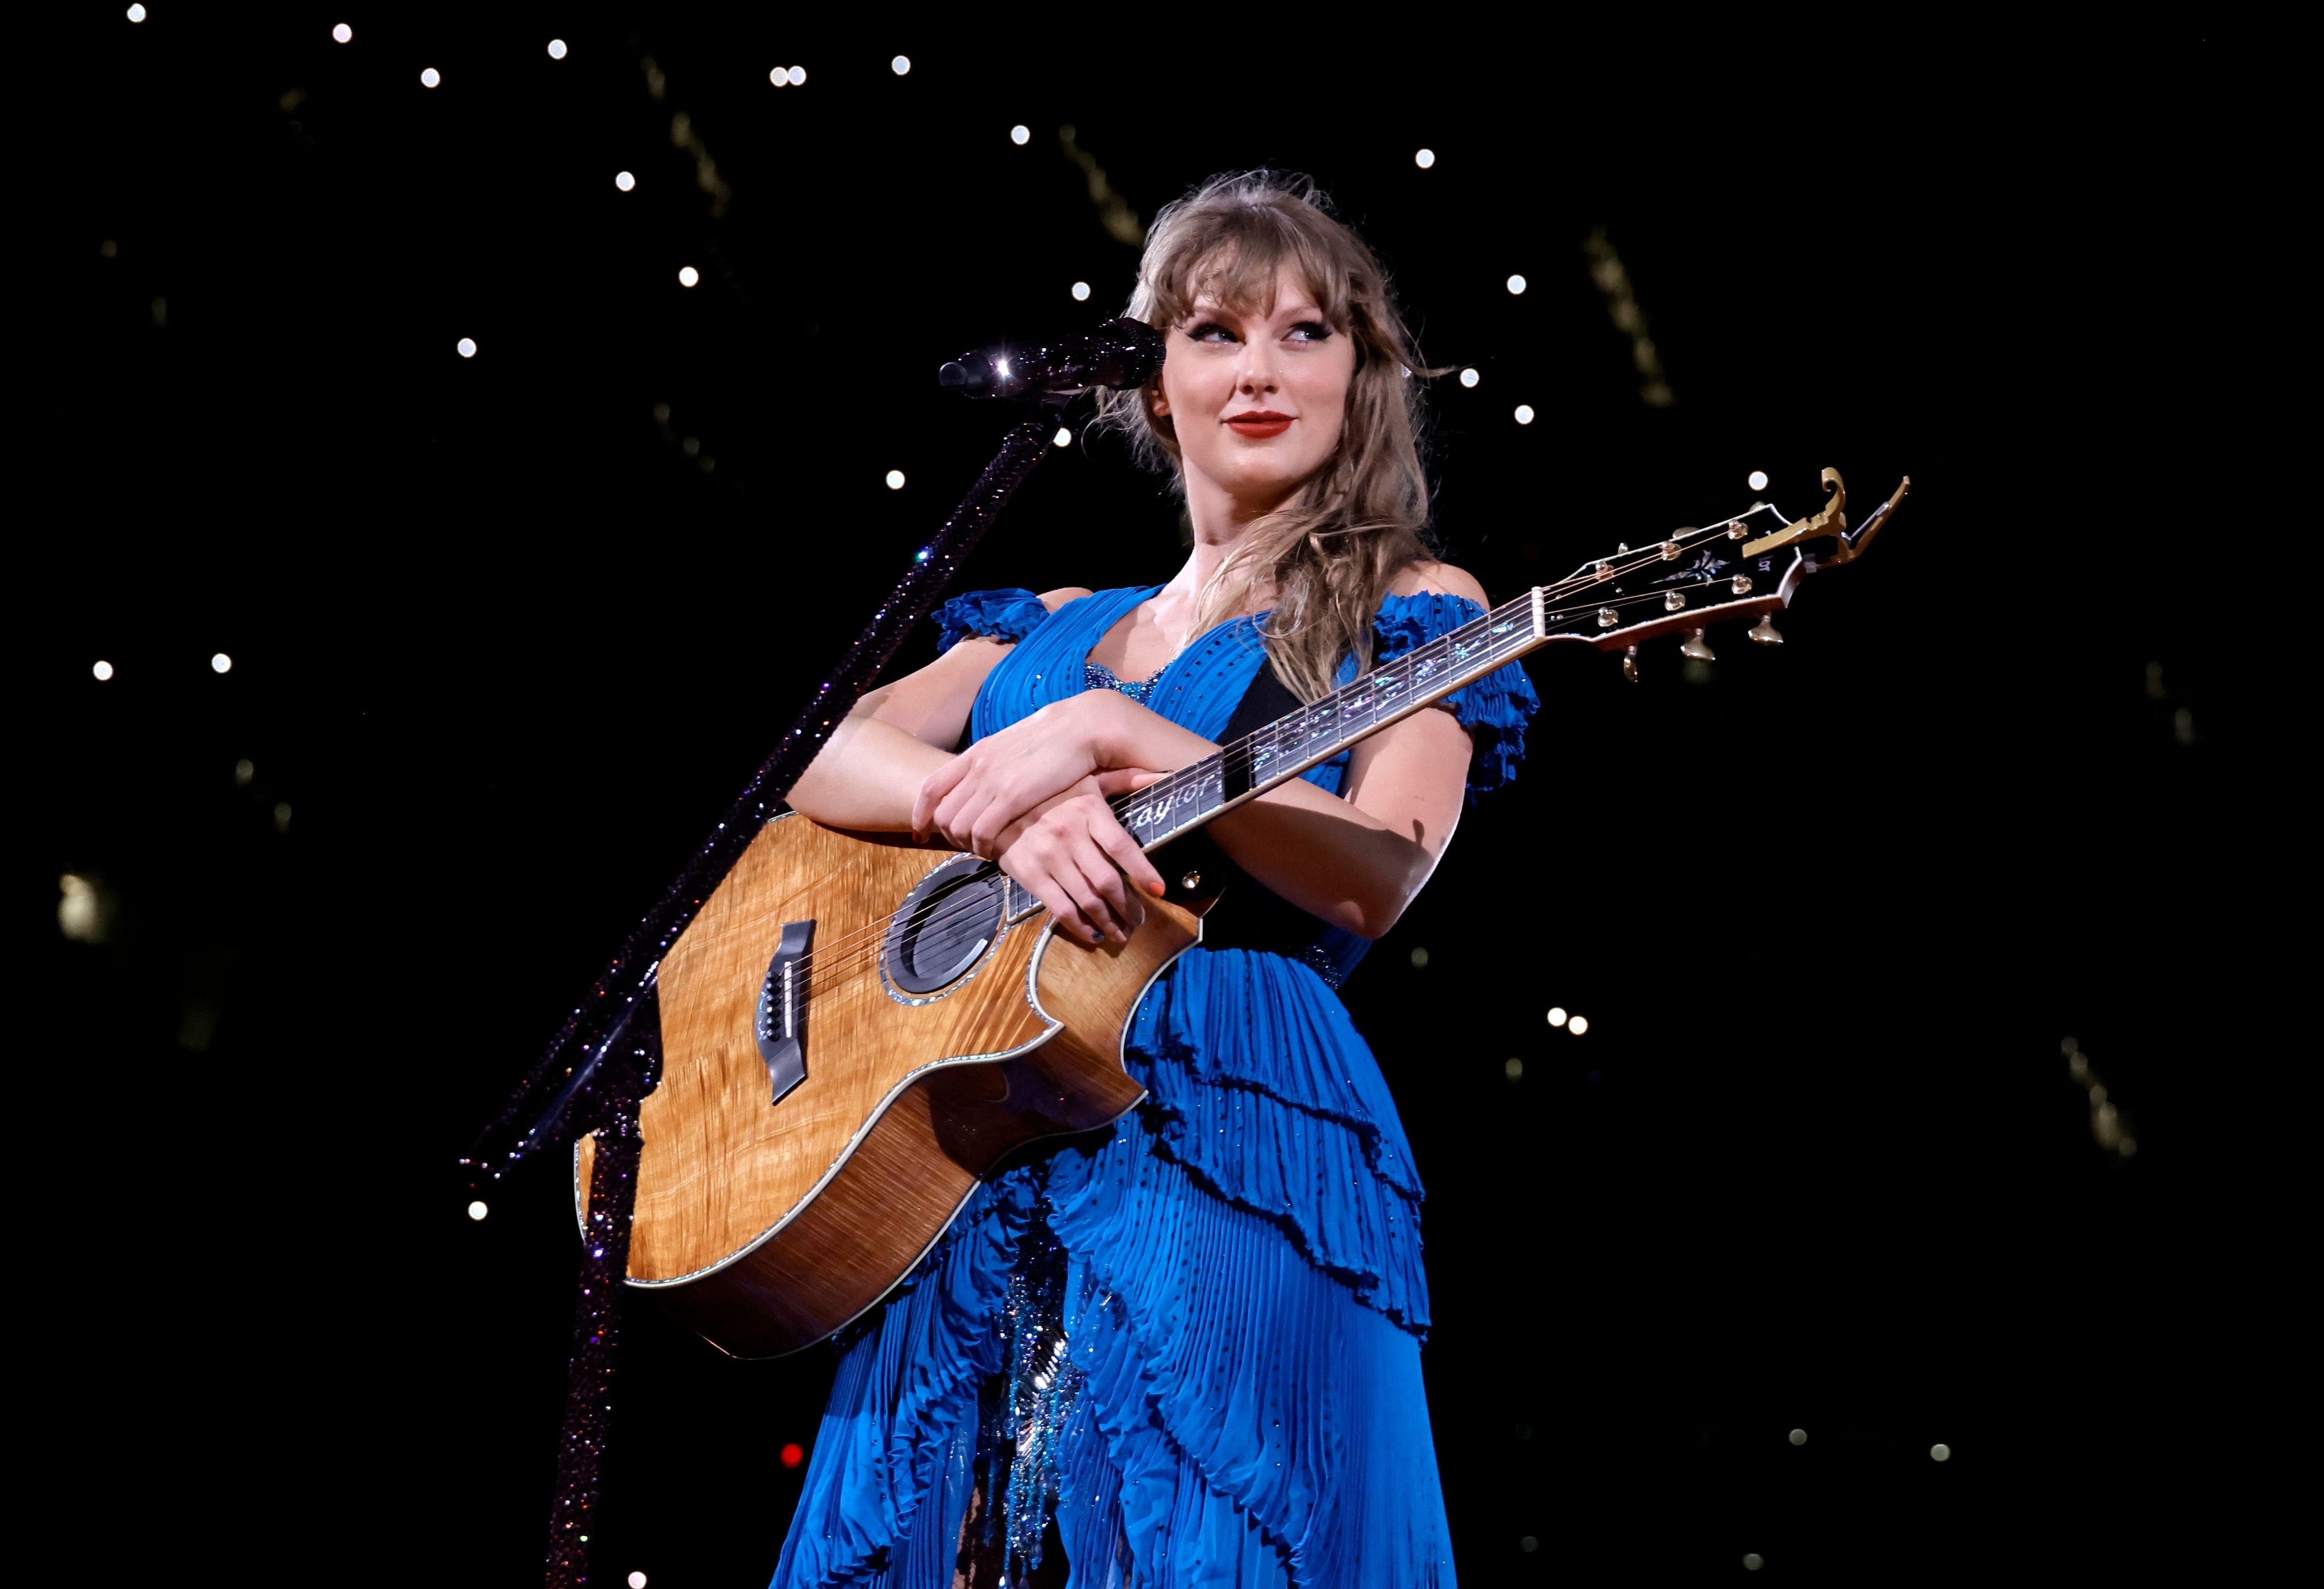 taylor on stage with her guitar